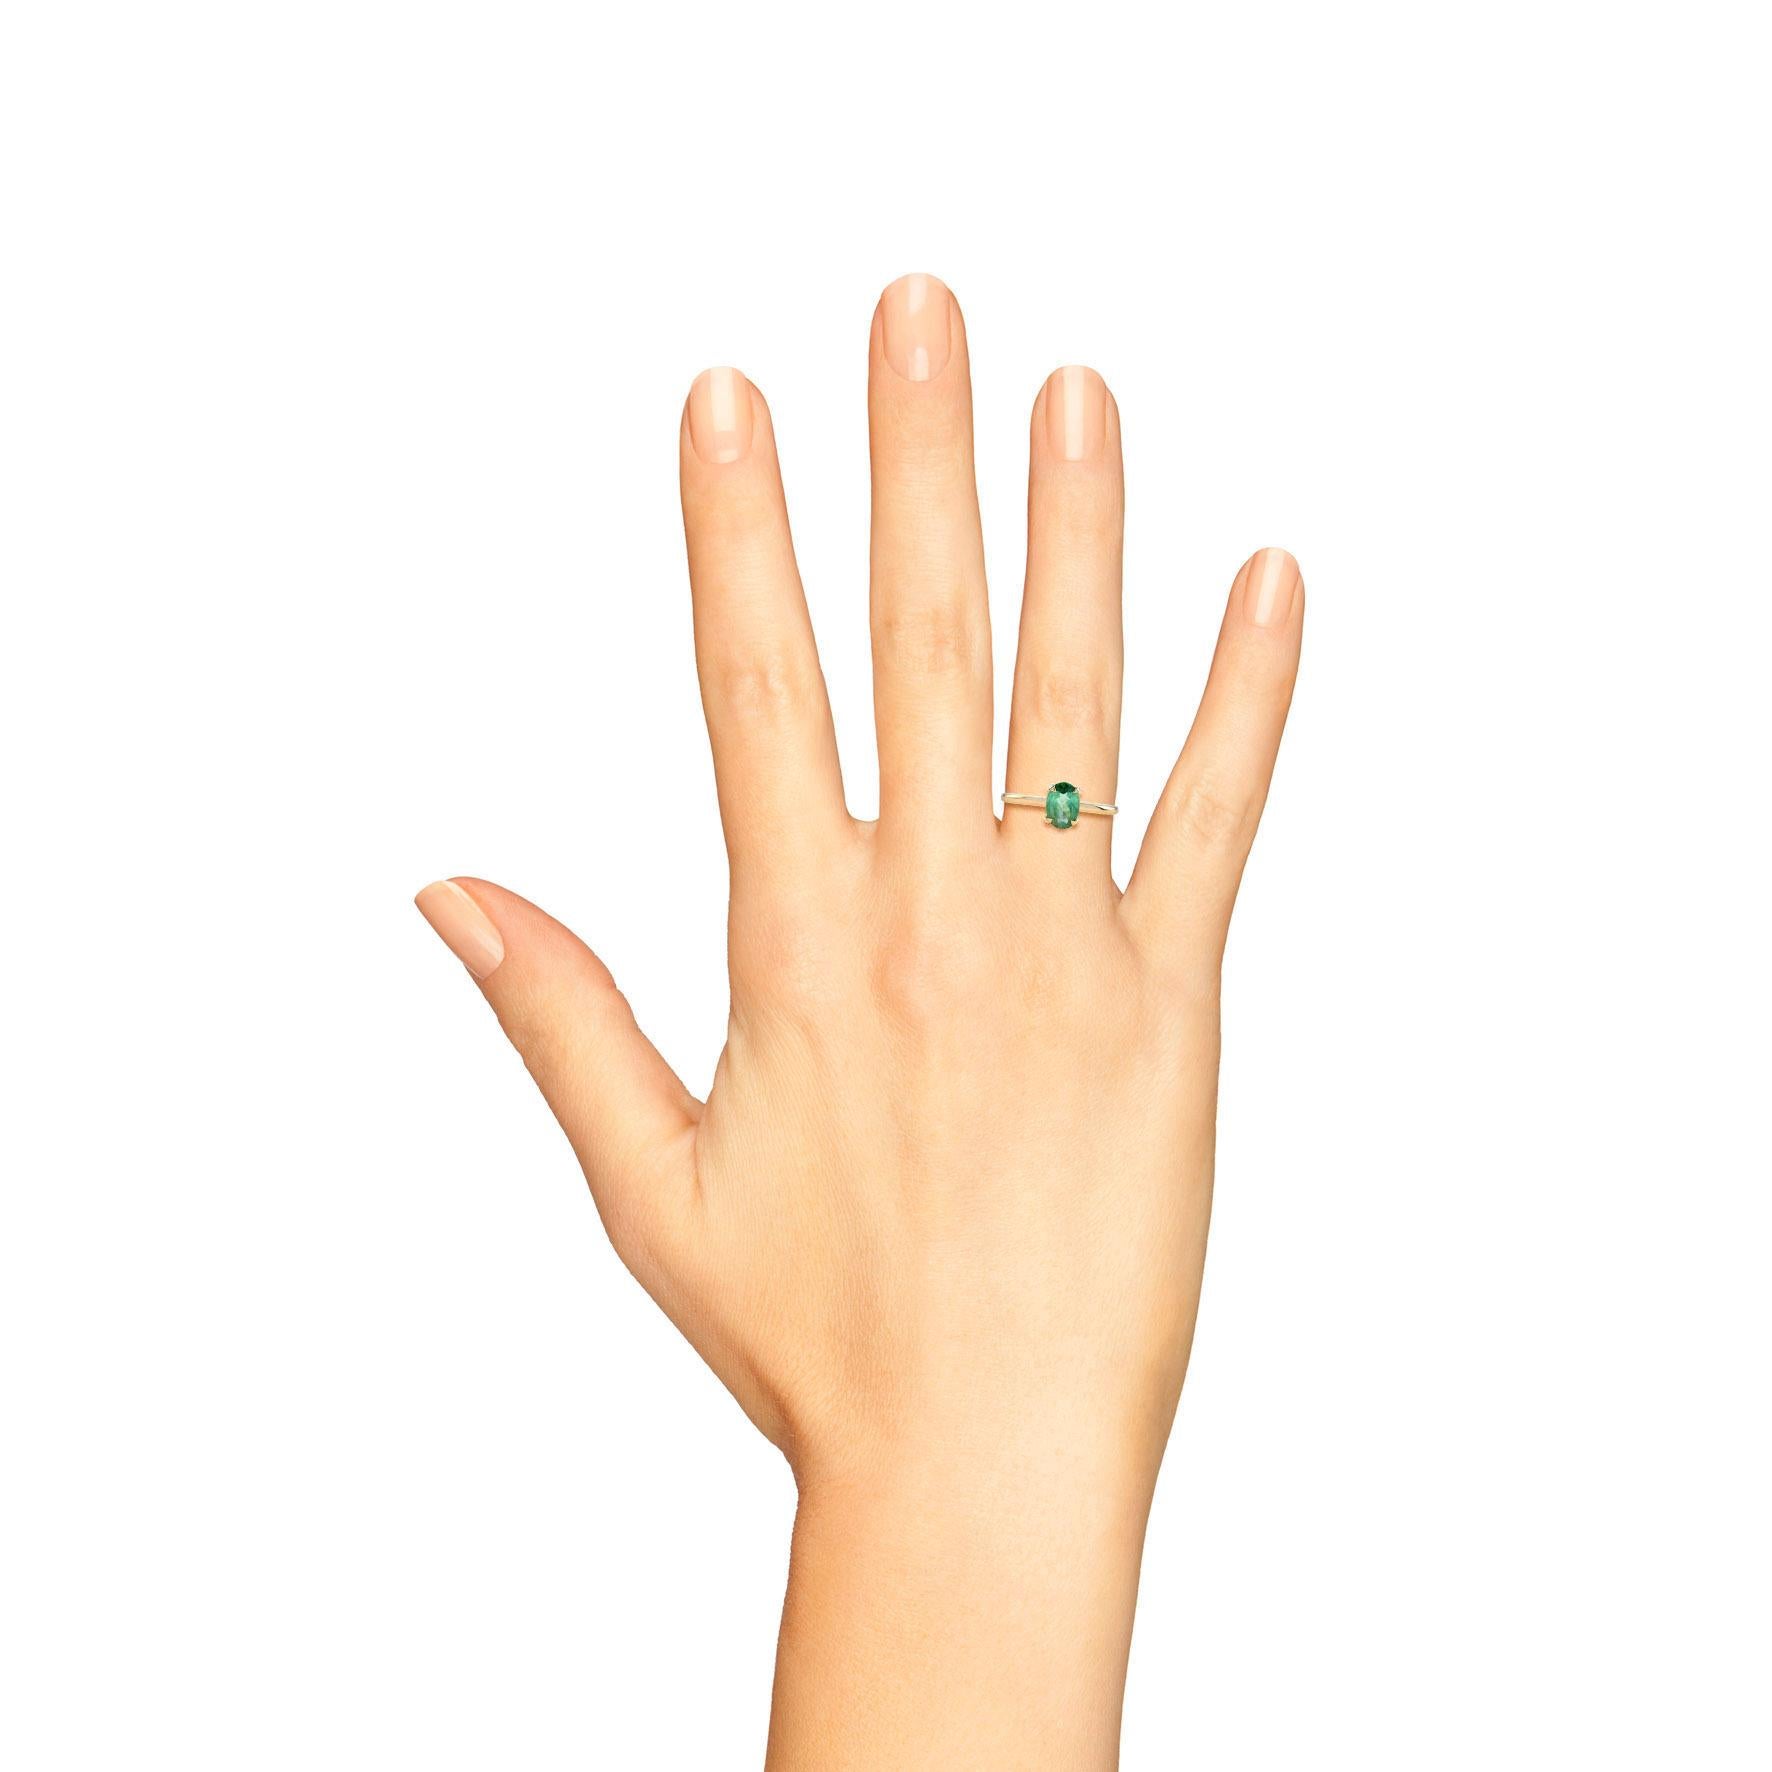 An embodiment of simply luxury, this lovely yellow gold ring features an oval cut green tourmaline gemstone. The precious gemstones are claw set, allowing the maximum amount of light to travel through the stones and accentuating the captivating